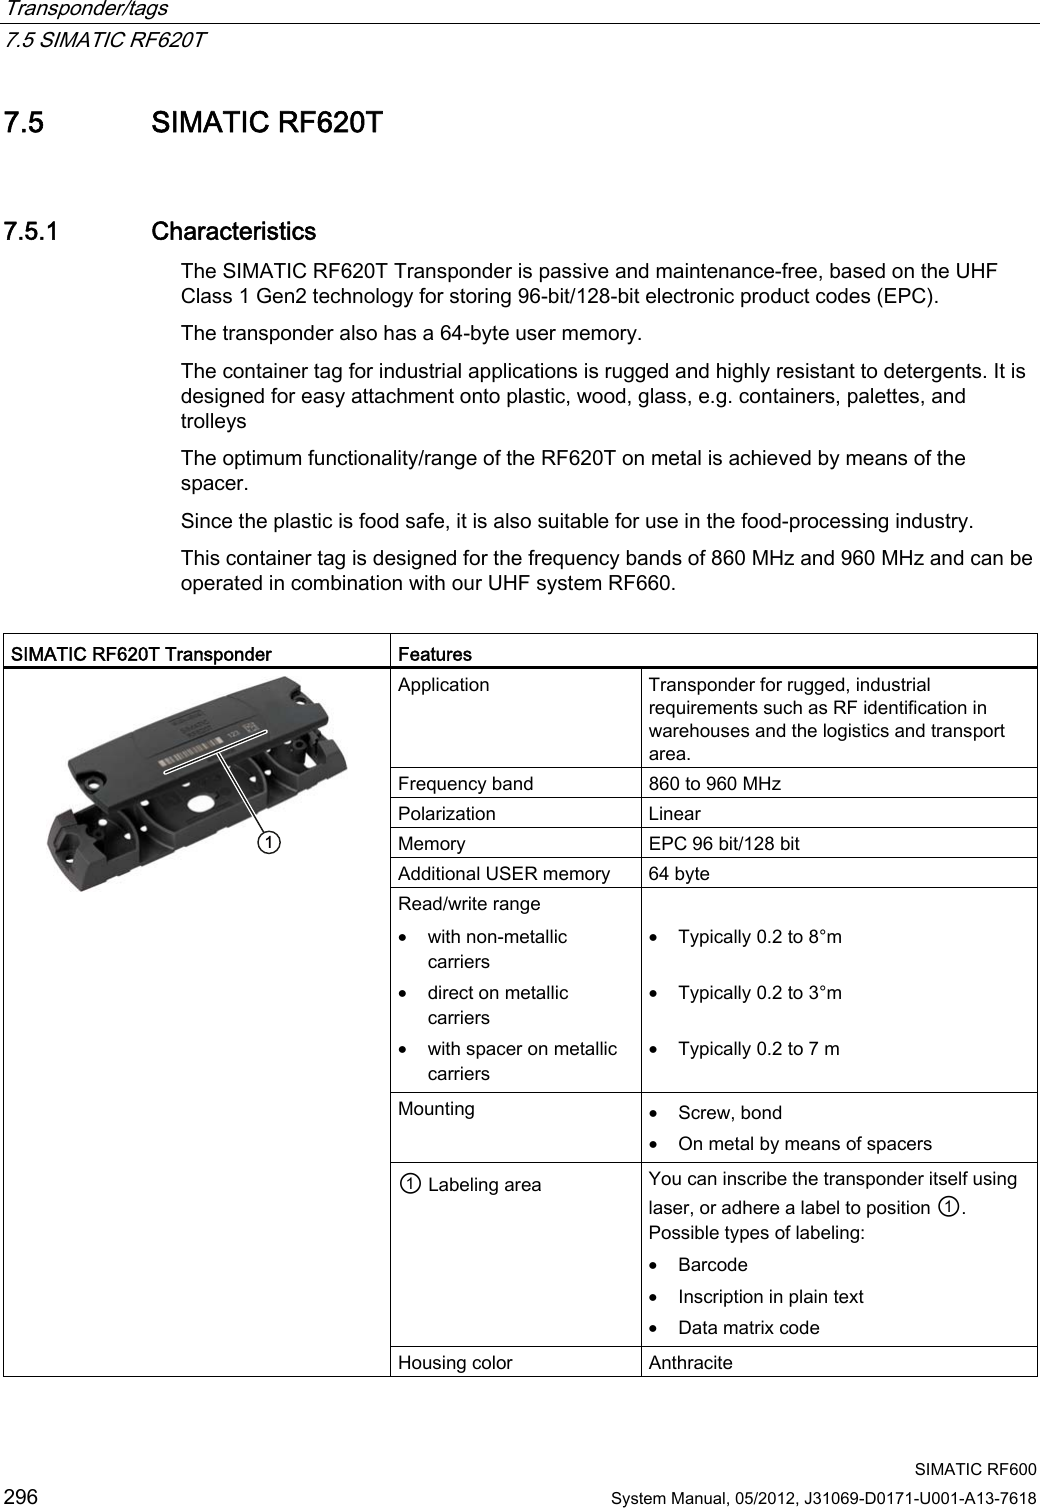 Transponder/tags   7.5 SIMATIC RF620T  SIMATIC RF600 296 System Manual, 05/2012, J31069-D0171-U001-A13-7618 7.5 SIMATIC RF620T 7.5.1 Characteristics The SIMATIC RF620T Transponder is passive and maintenance-free, based on the UHF Class 1 Gen2 technology for storing 96-bit/128-bit electronic product codes (EPC). The transponder also has a 64-byte user memory. The container tag for industrial applications is rugged and highly resistant to detergents. It is designed for easy attachment onto plastic, wood, glass, e.g. containers, palettes, and trolleys The optimum functionality/range of the RF620T on metal is achieved by means of the spacer. Since the plastic is food safe, it is also suitable for use in the food-processing industry.  This container tag is designed for the frequency bands of 860 MHz and 960 MHz and can be operated in combination with our UHF system RF660.  SIMATIC RF620T Transponder   Features Application  Transponder for rugged, industrial requirements such as RF identification in warehouses and the logistics and transport area. Frequency band  860 to 960 MHz Polarization   Linear Memory  EPC 96 bit/128 bit Additional USER memory  64 byte Read/write range • with non-metallic carriers • direct on metallic carriers • with spacer on metallic carriers  • Typically 0.2 to 8°m  • Typically 0.2 to 3°m  • Typically 0.2 to 7 m Mounting  • Screw, bond • On metal by means of spacers ① Labeling area  You can inscribe the transponder itself using laser, or adhere a label to position ①. Possible types of labeling: • Barcode • Inscription in plain text • Data matrix code  Housing color  Anthracite 